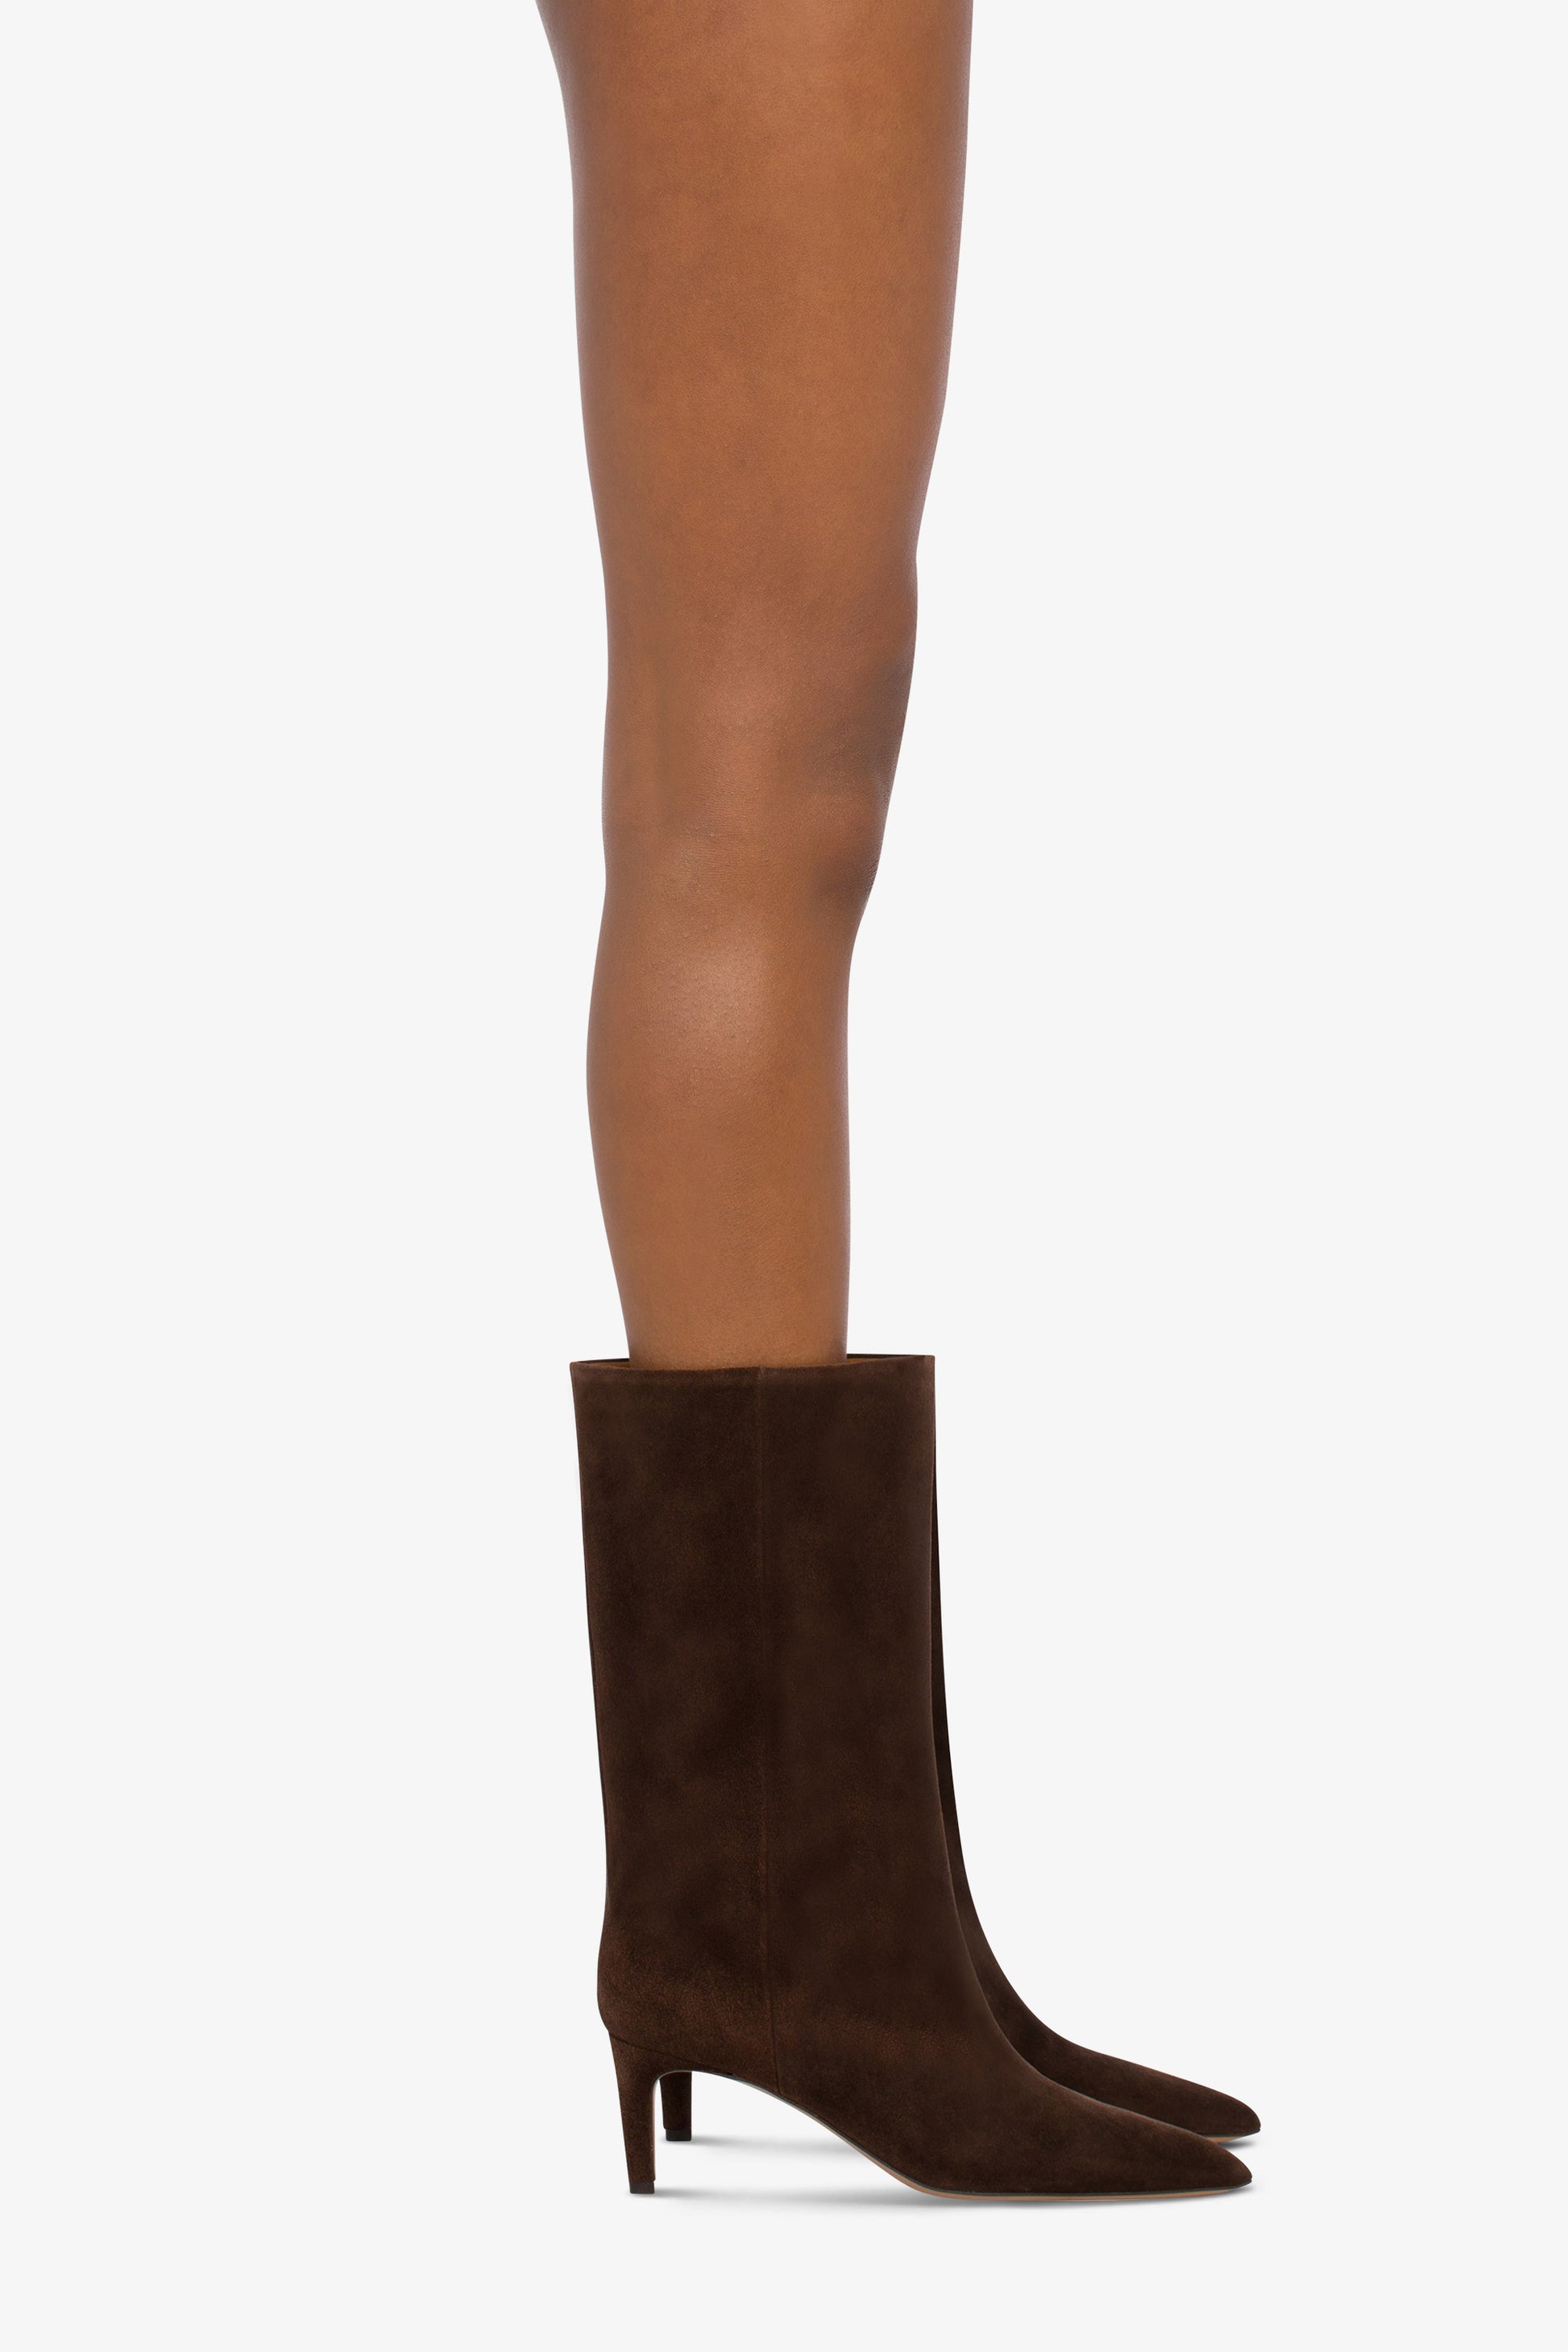 Calf-high boots in smooth pepper suede leather - Producto usado